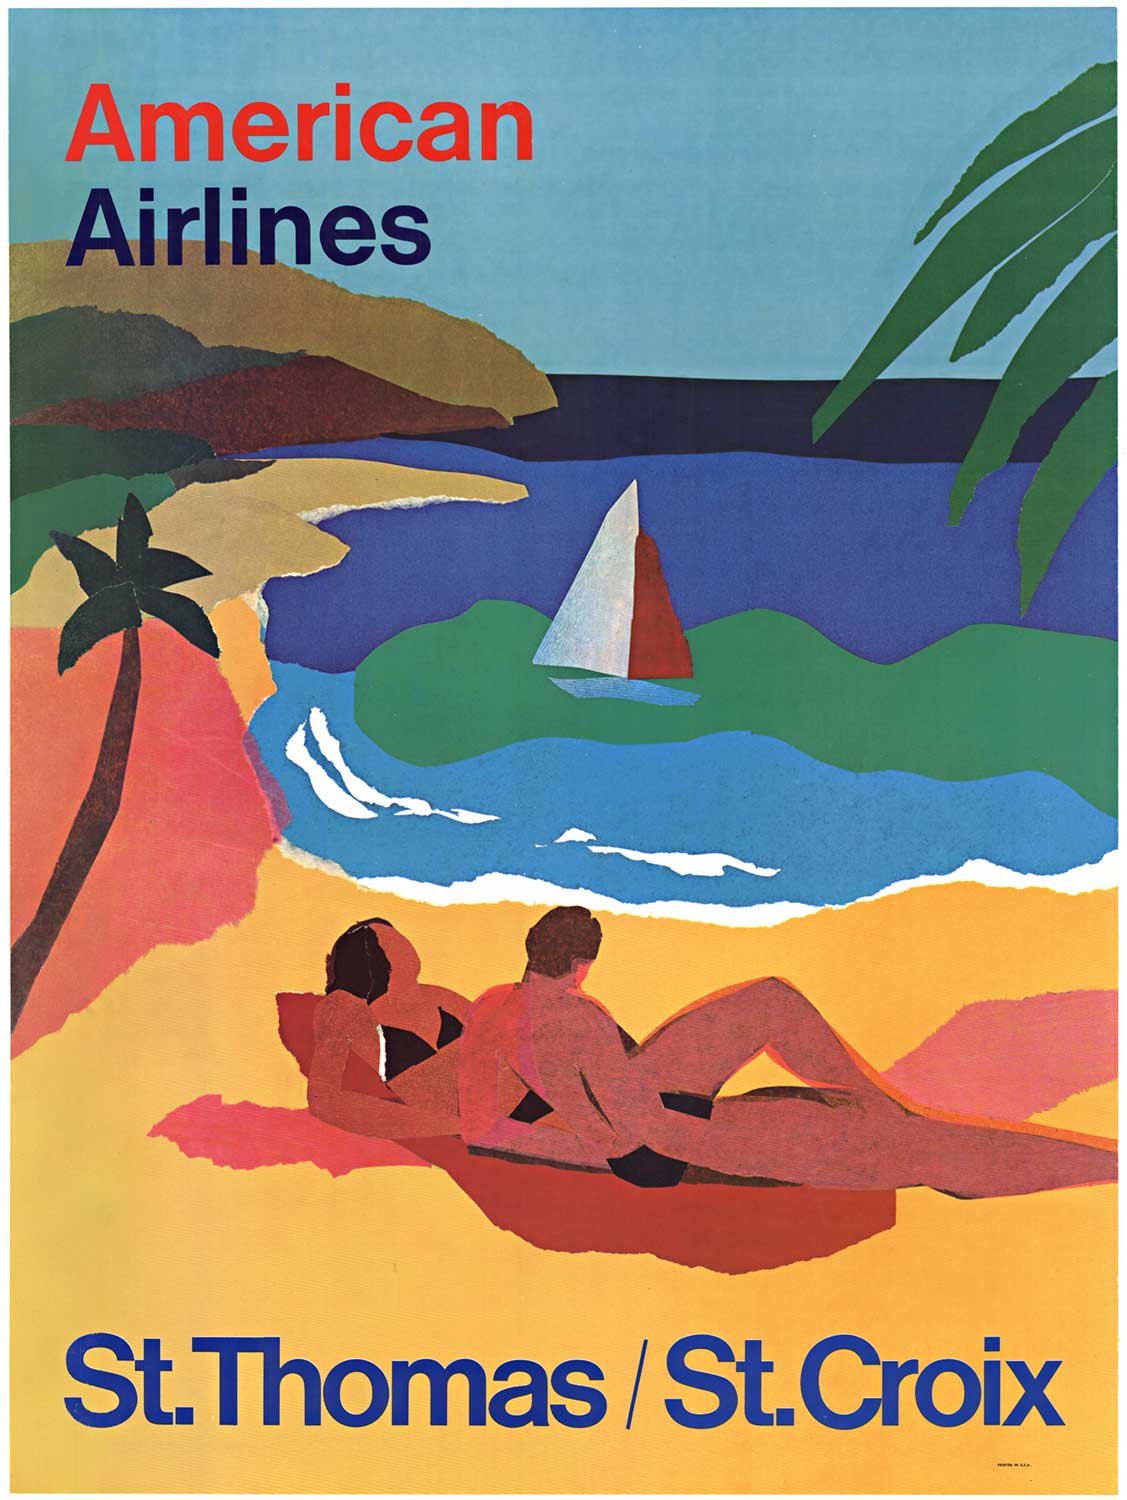 Anonymous Artists - American Airlines, St. Thomas / St. Croix